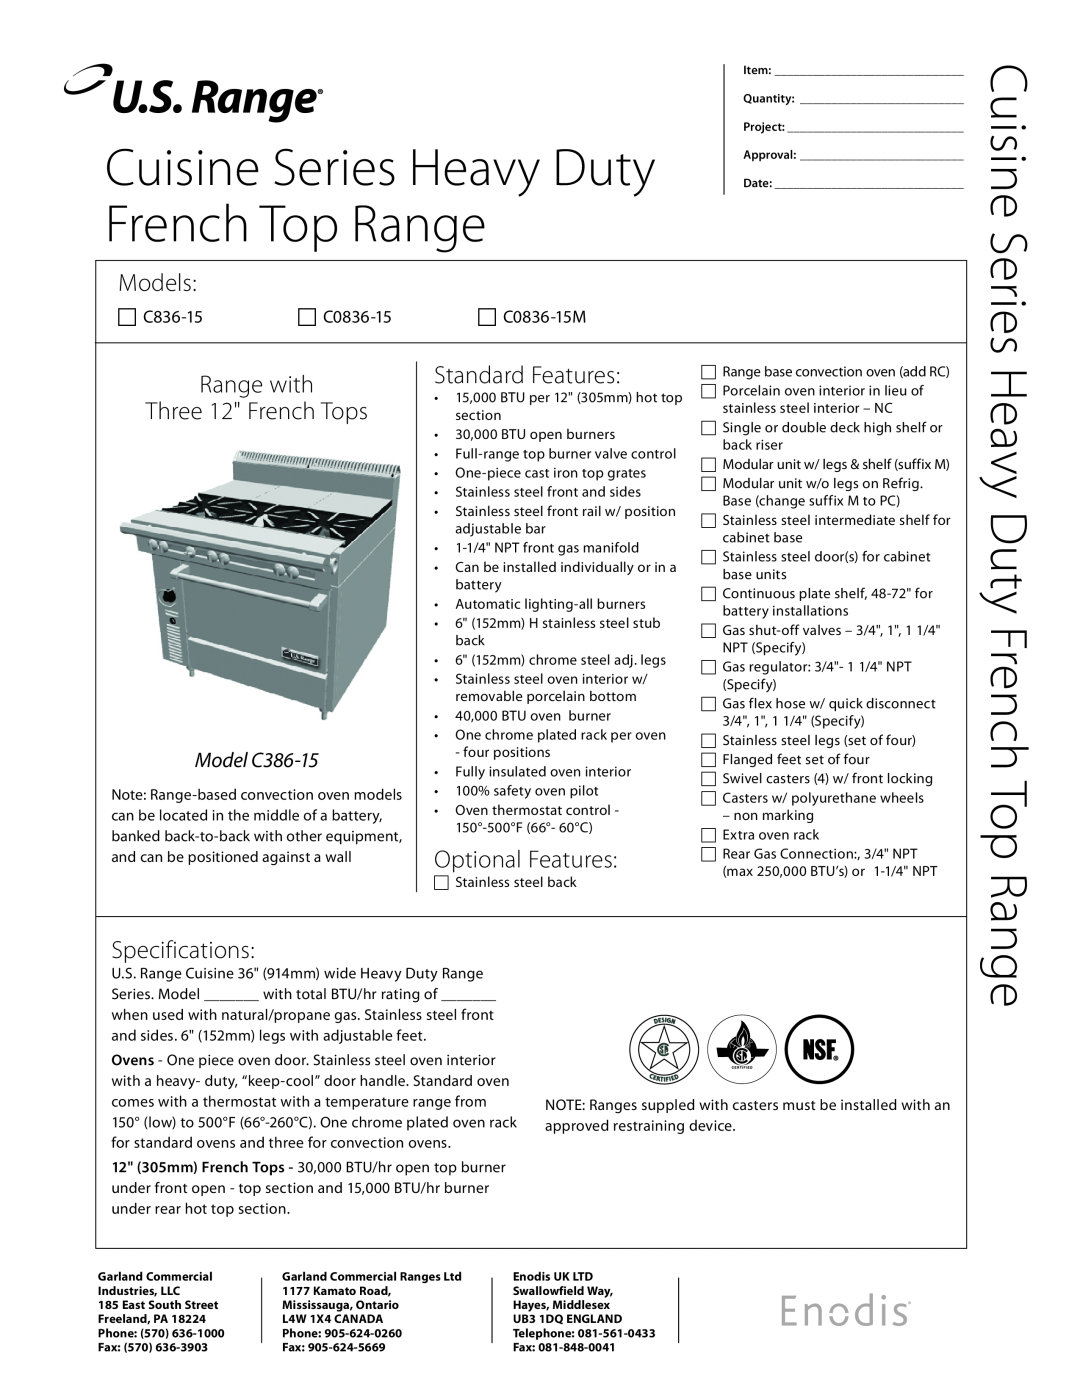 Garland C0836-15 specifications Cuisine Series Heavy Duty French Top Range, Models, Standard Features,  C836-15 